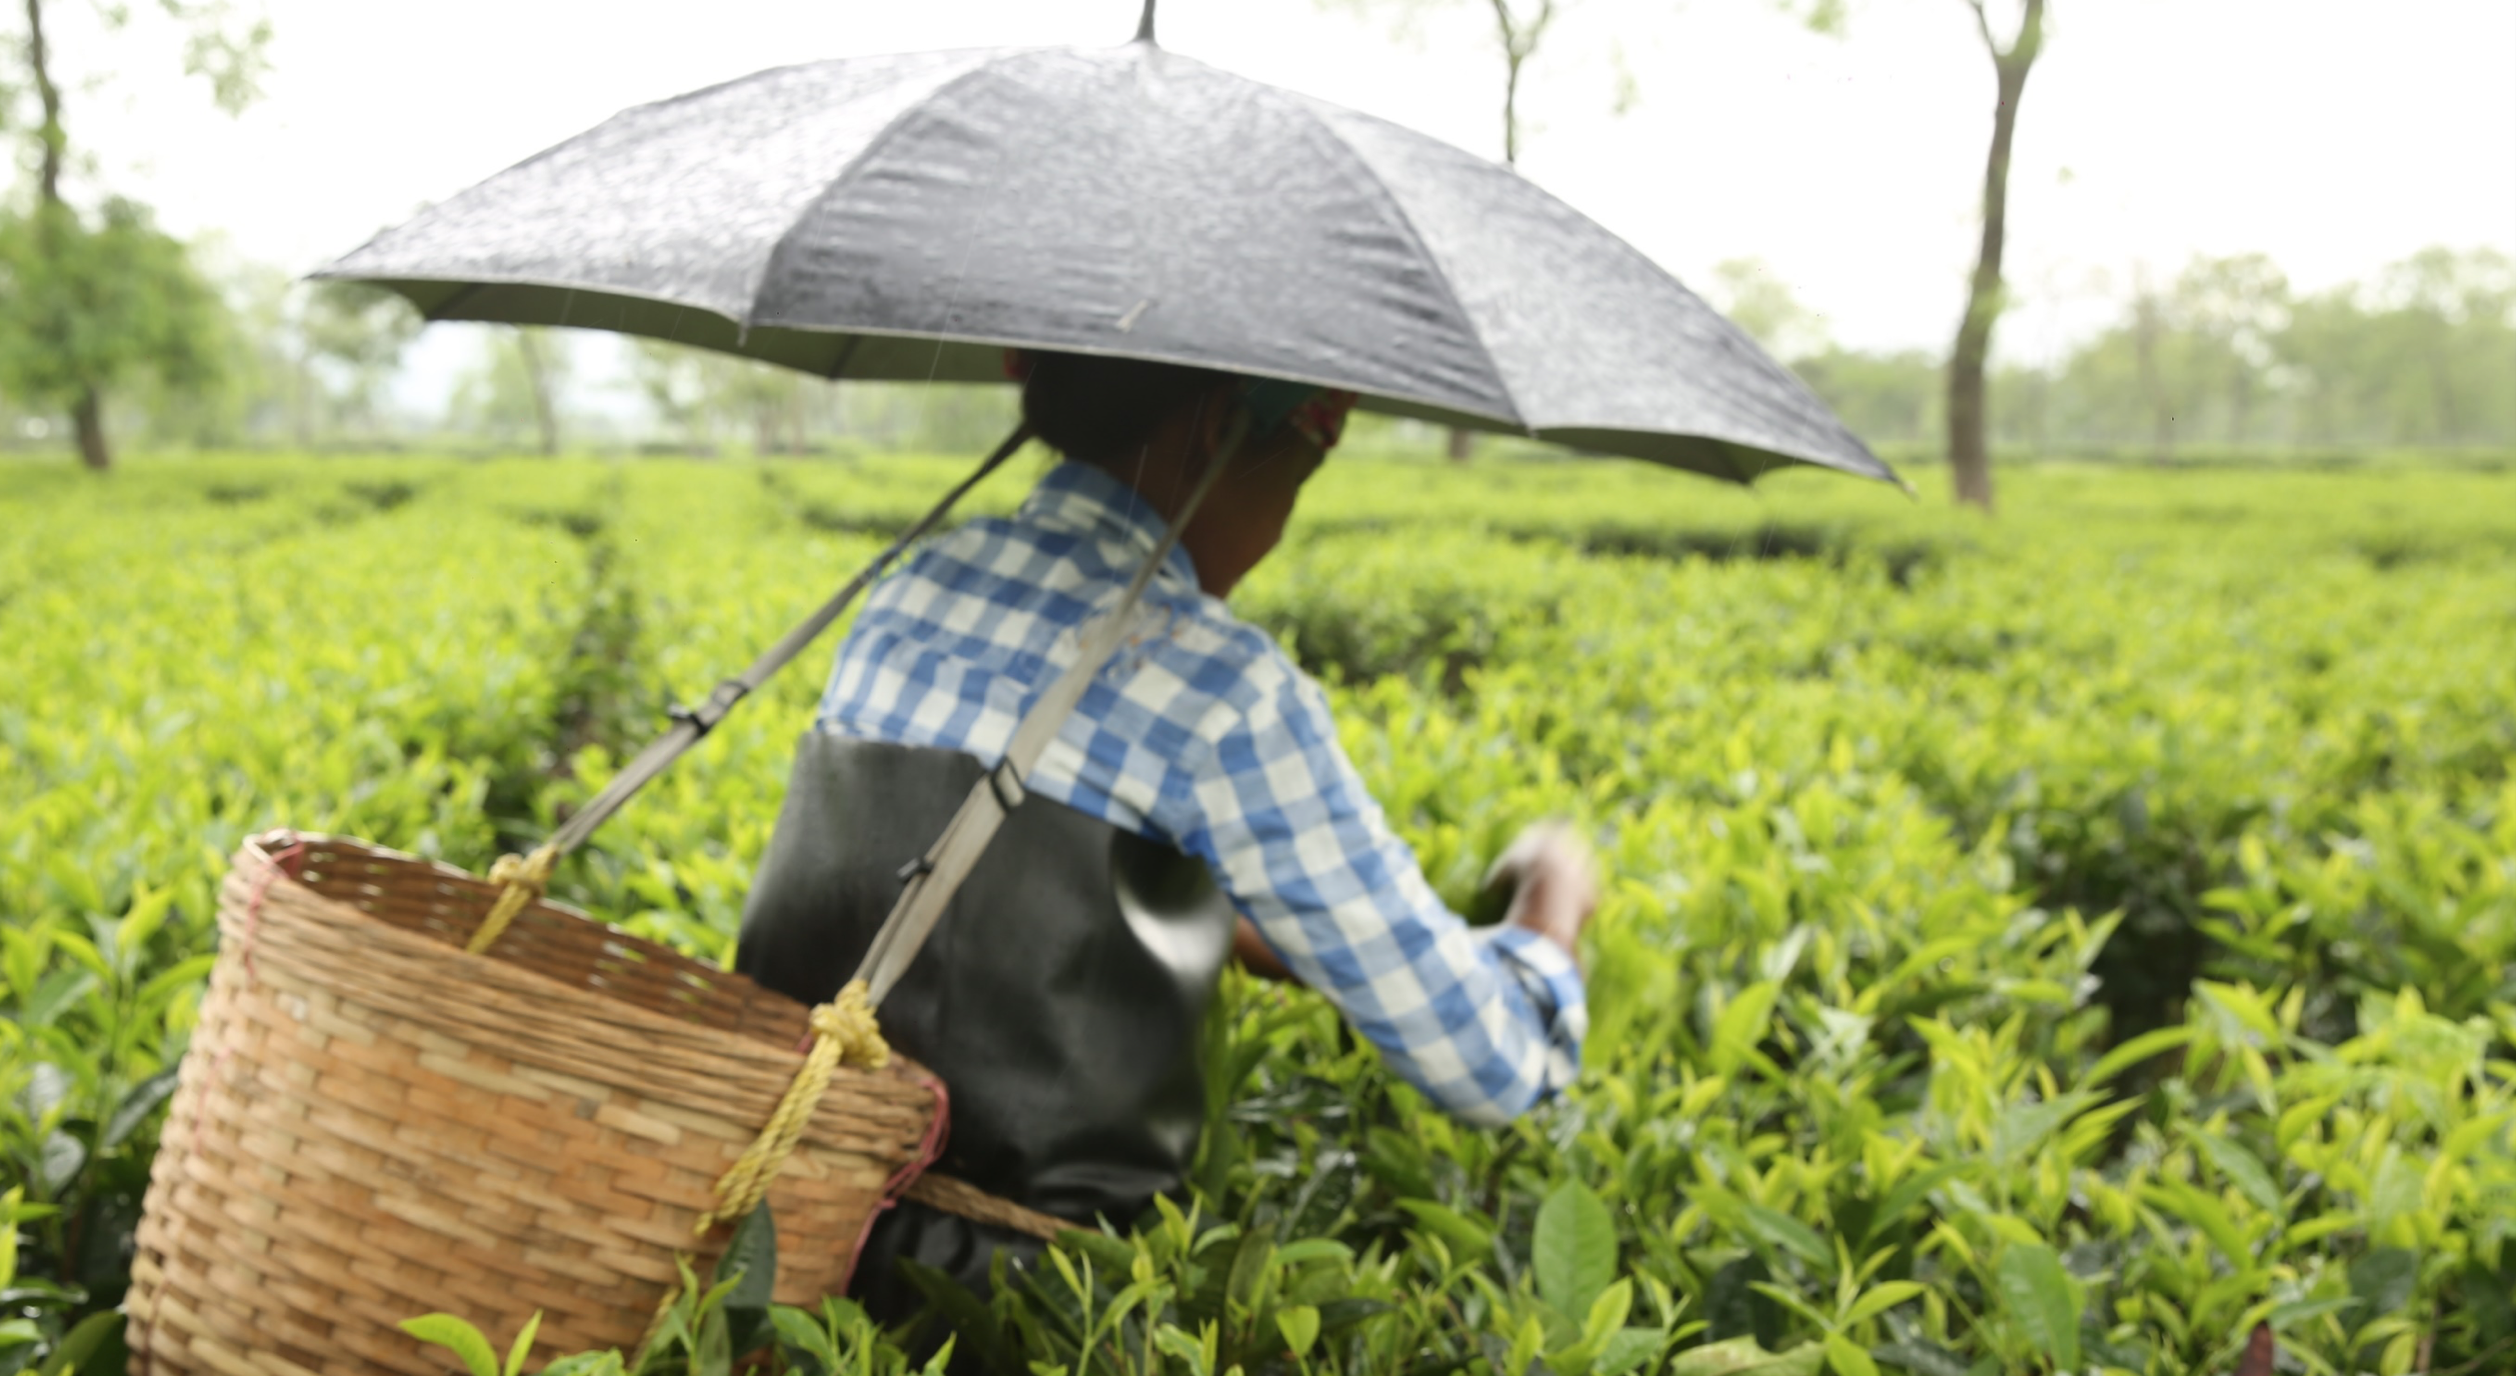 Addressing the human cost of Assam tea: An agenda for change to respect, protect and fulfil human rights on Assam tea plantations